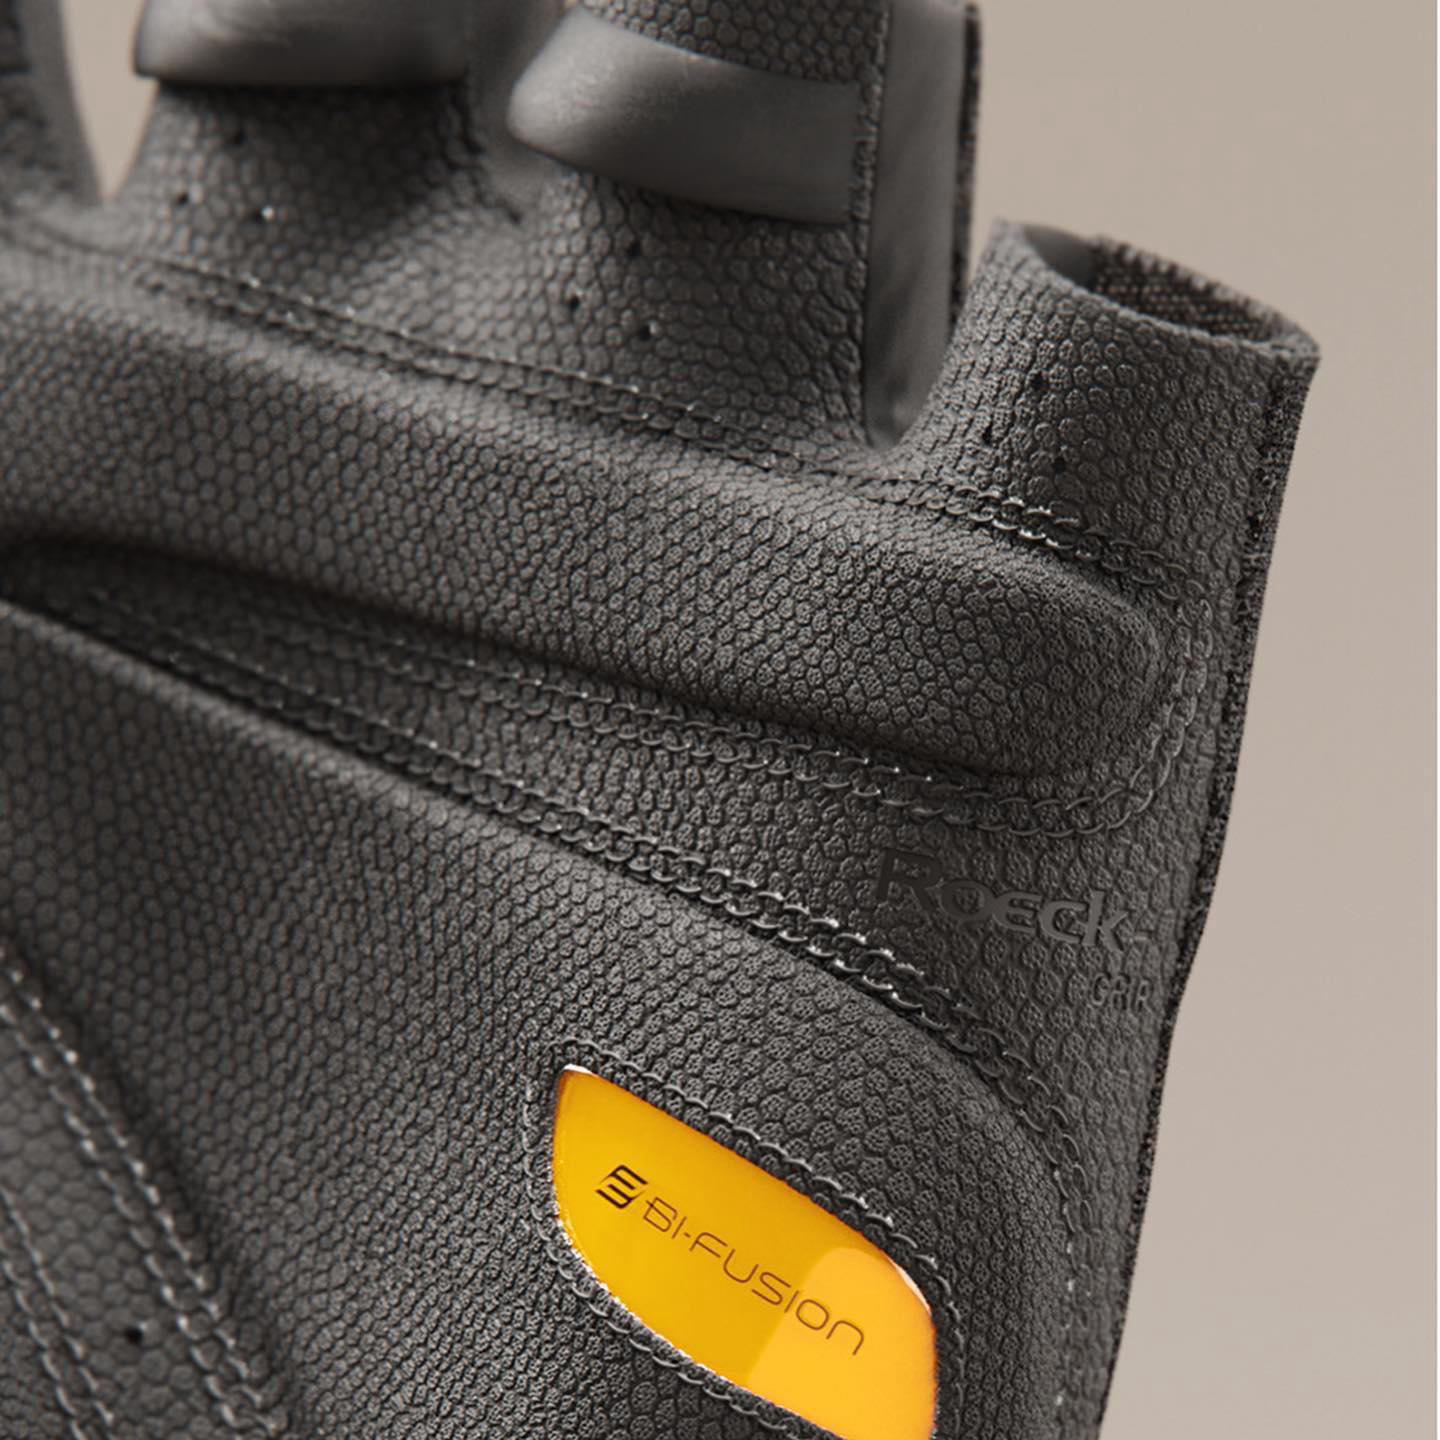 RenderShot - The high-end short-fingered glove is one of its kind when it comes to comfort and perfo